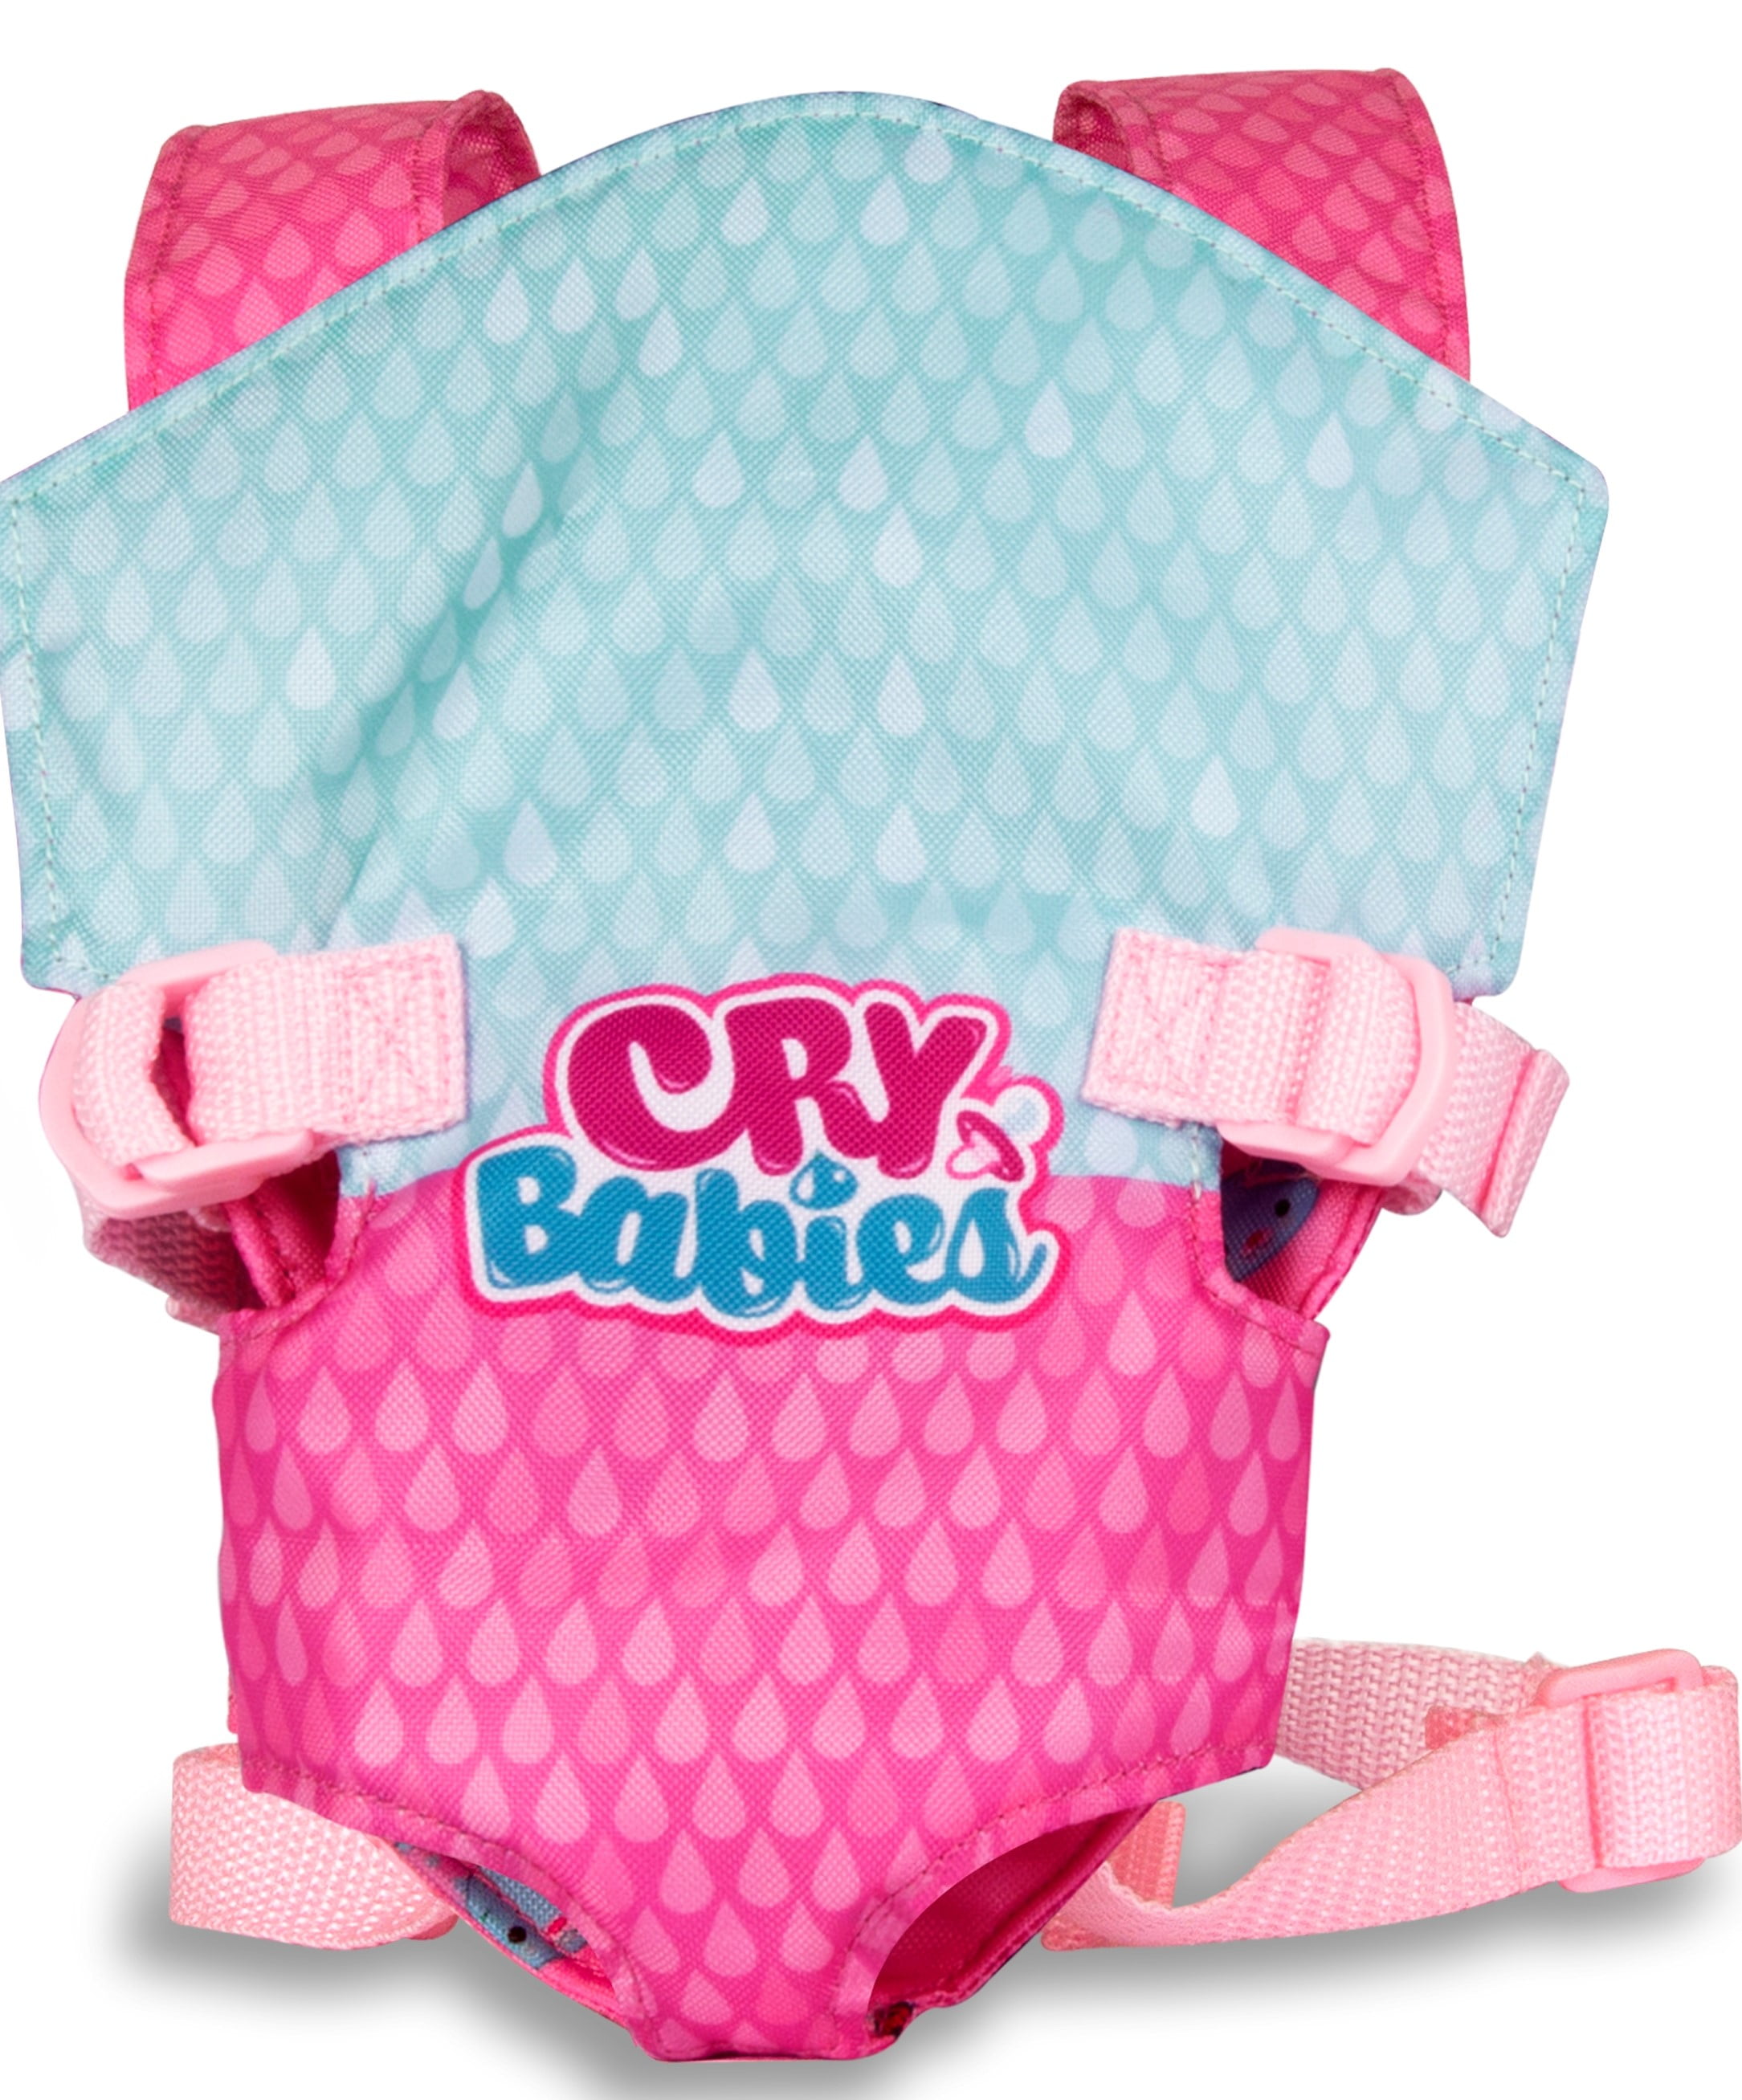 Cry Babies Baby Doll Carrier - Walmart 